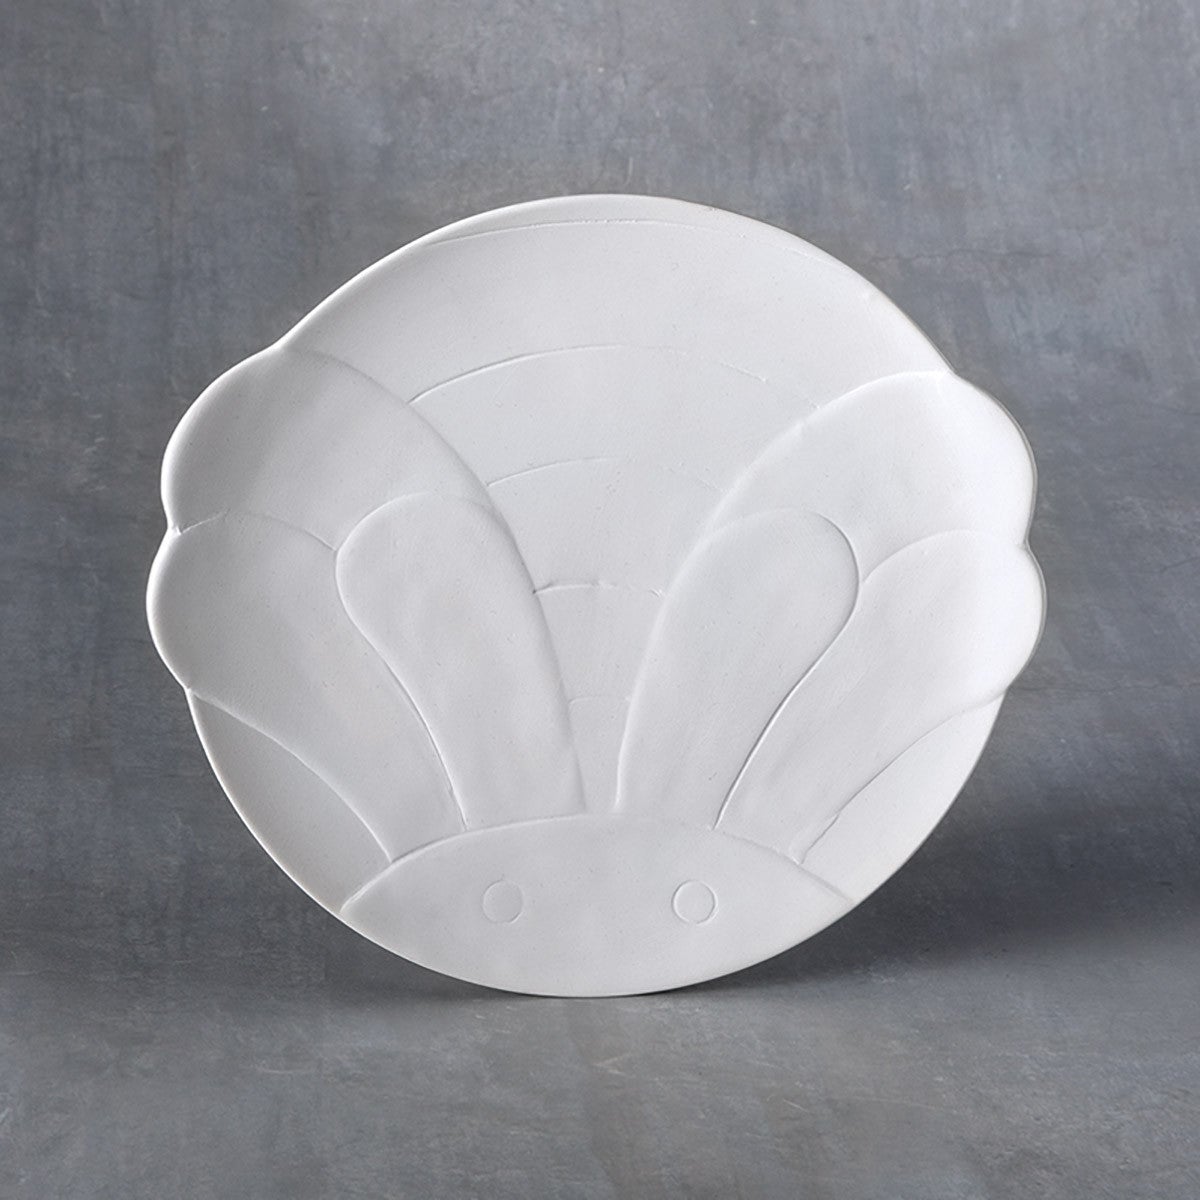 Duncan - 37475 Bisque Bumble Bee Plate - Sounding Stone